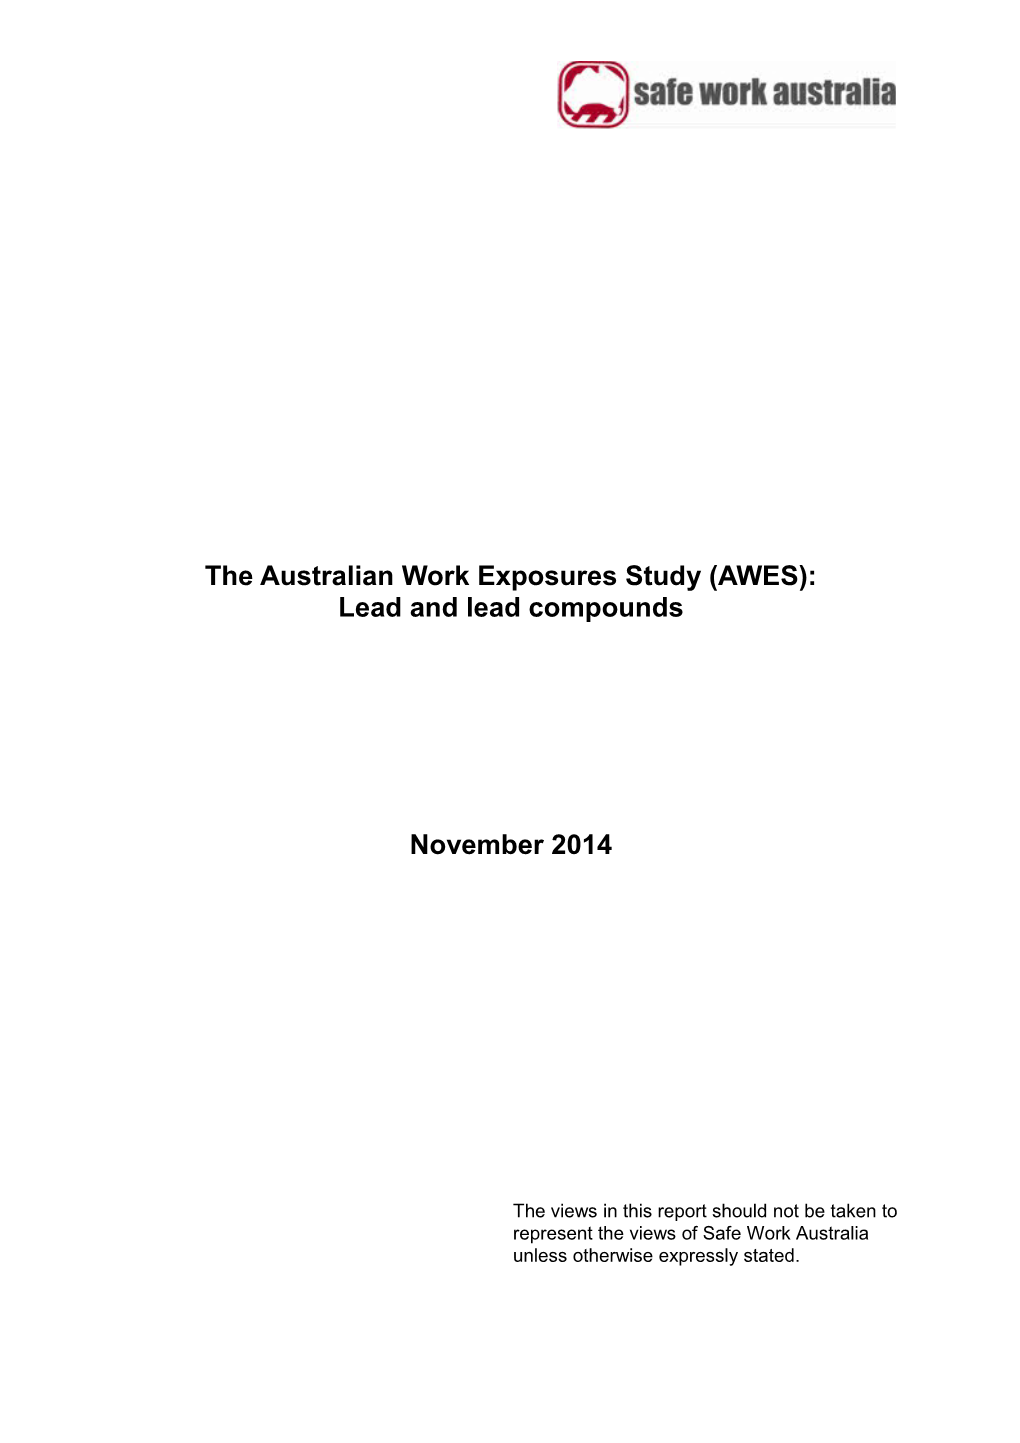 Australian Work Exposures Study (AWES) - Lead and Lead Compounds